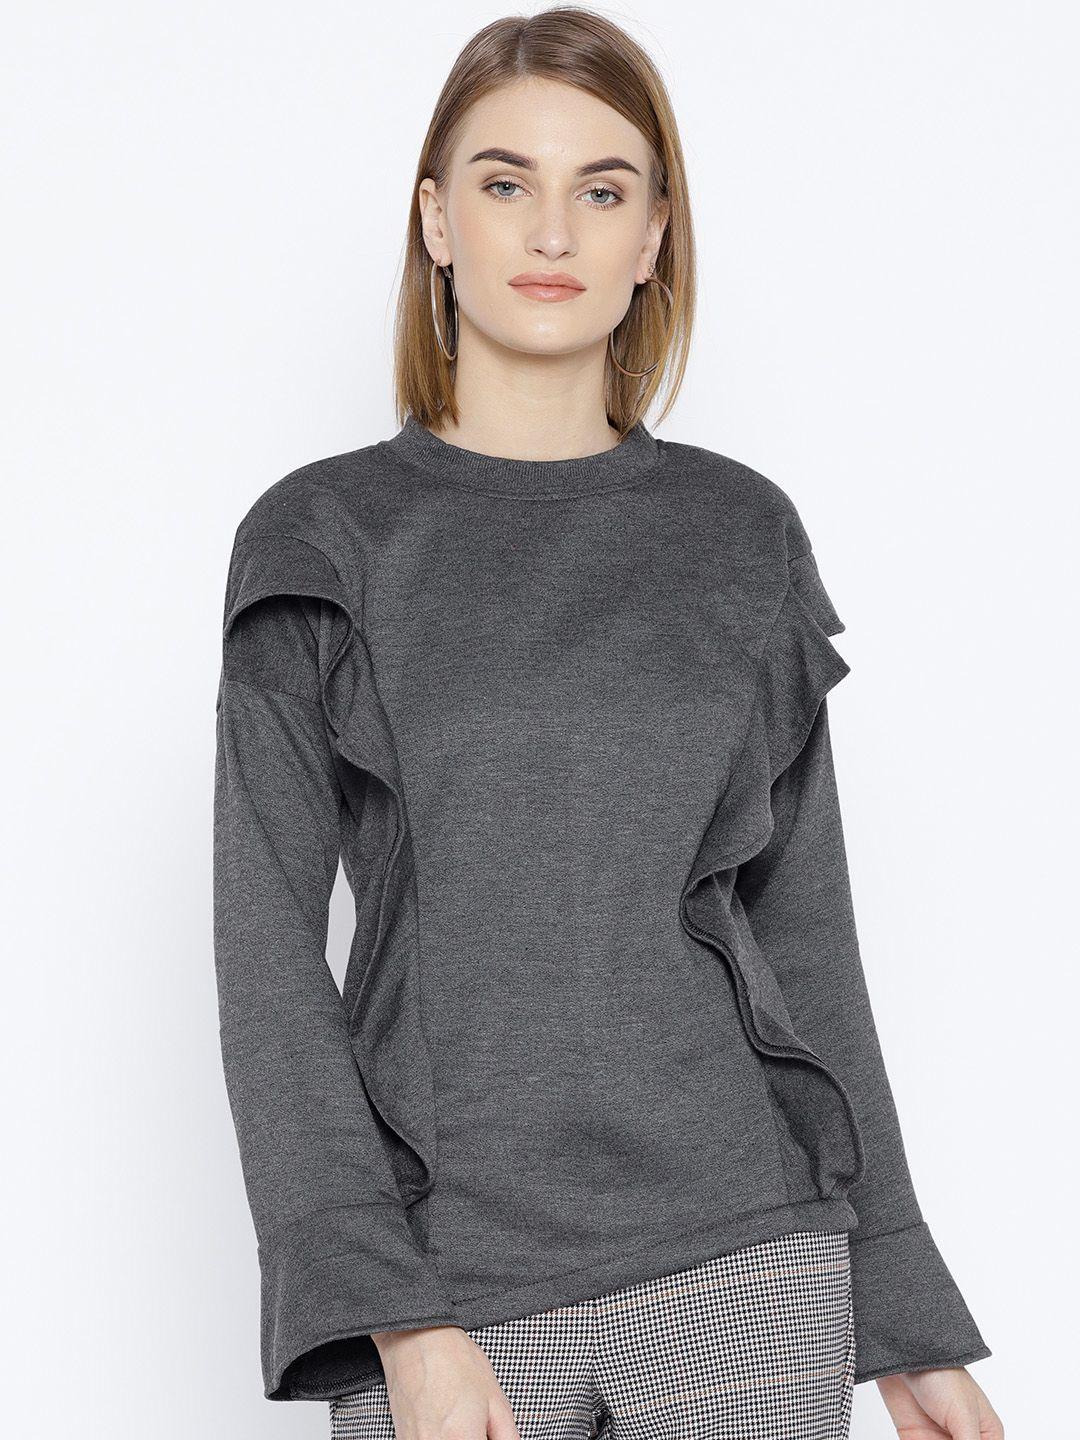 belle-fille-women-charcoal-solid-sweatshirt-with-ruffle-detail